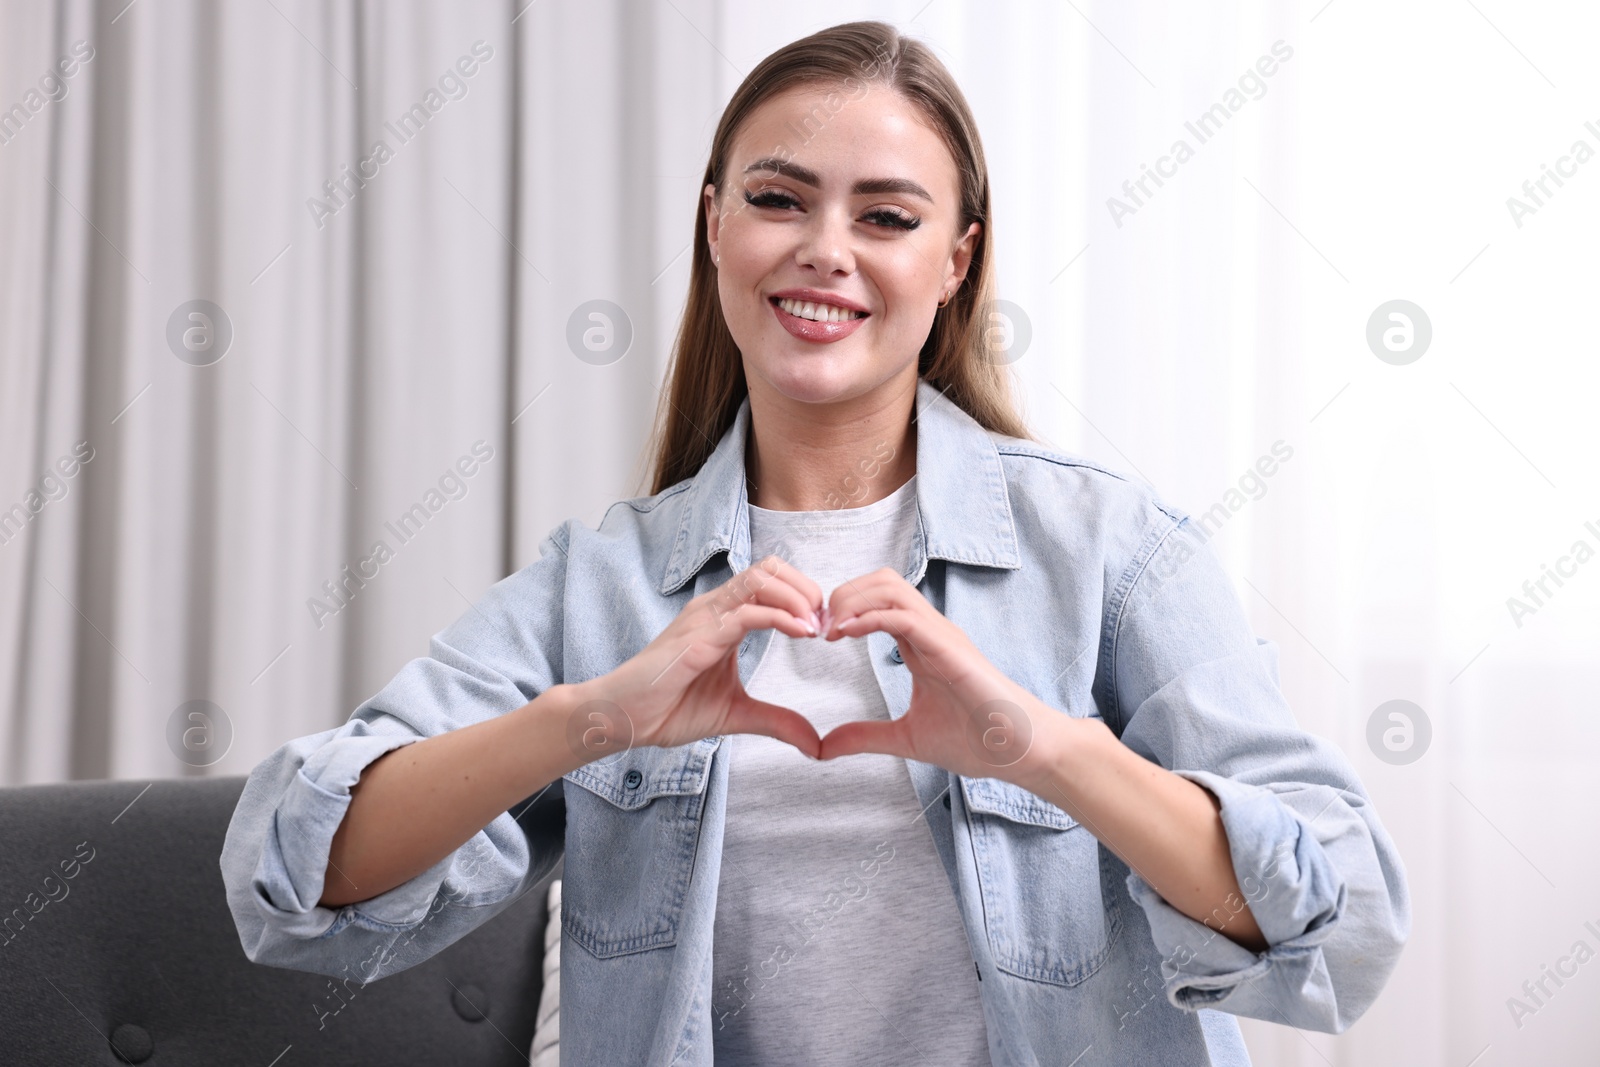 Photo of Happy woman showing heart gesture with hands indoors